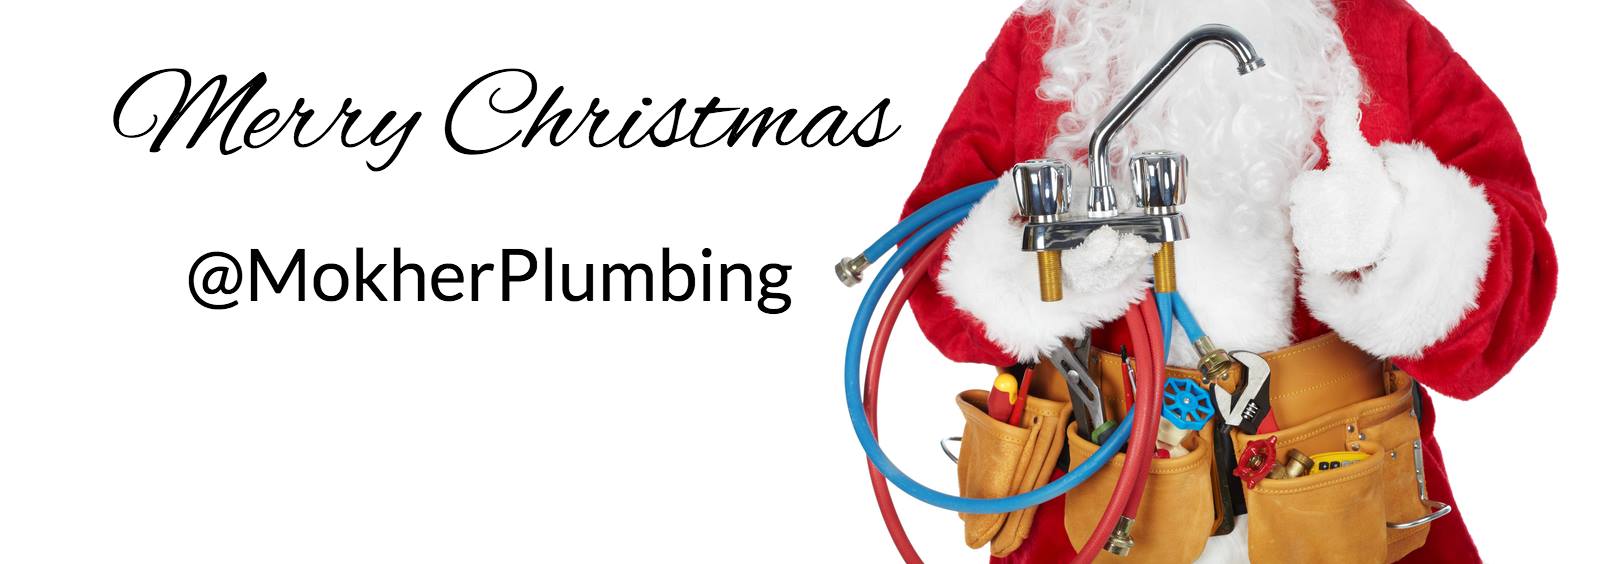 Tips for Preparing Your Plumbing for the Holidays  